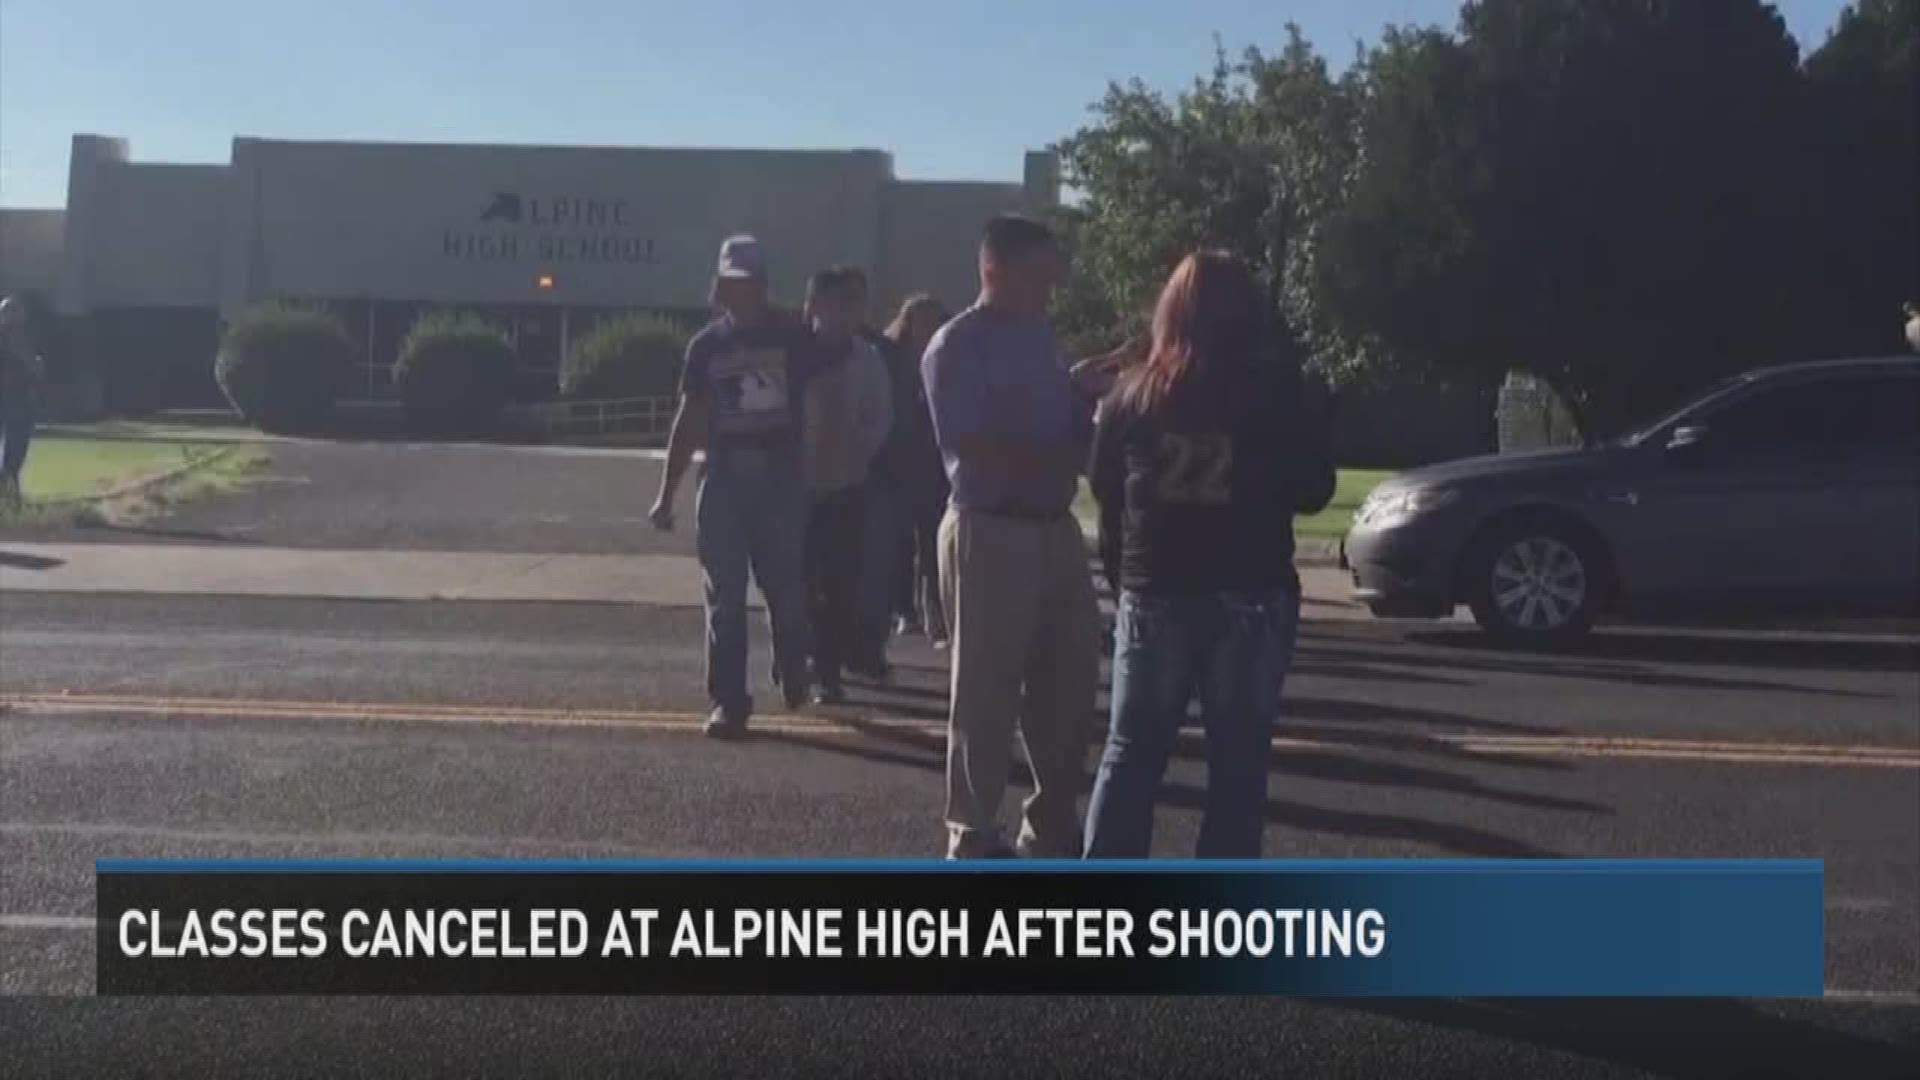 The Alpine Independent School District canceled classes after one of their students shot a girl, then turned the gun on herself. 